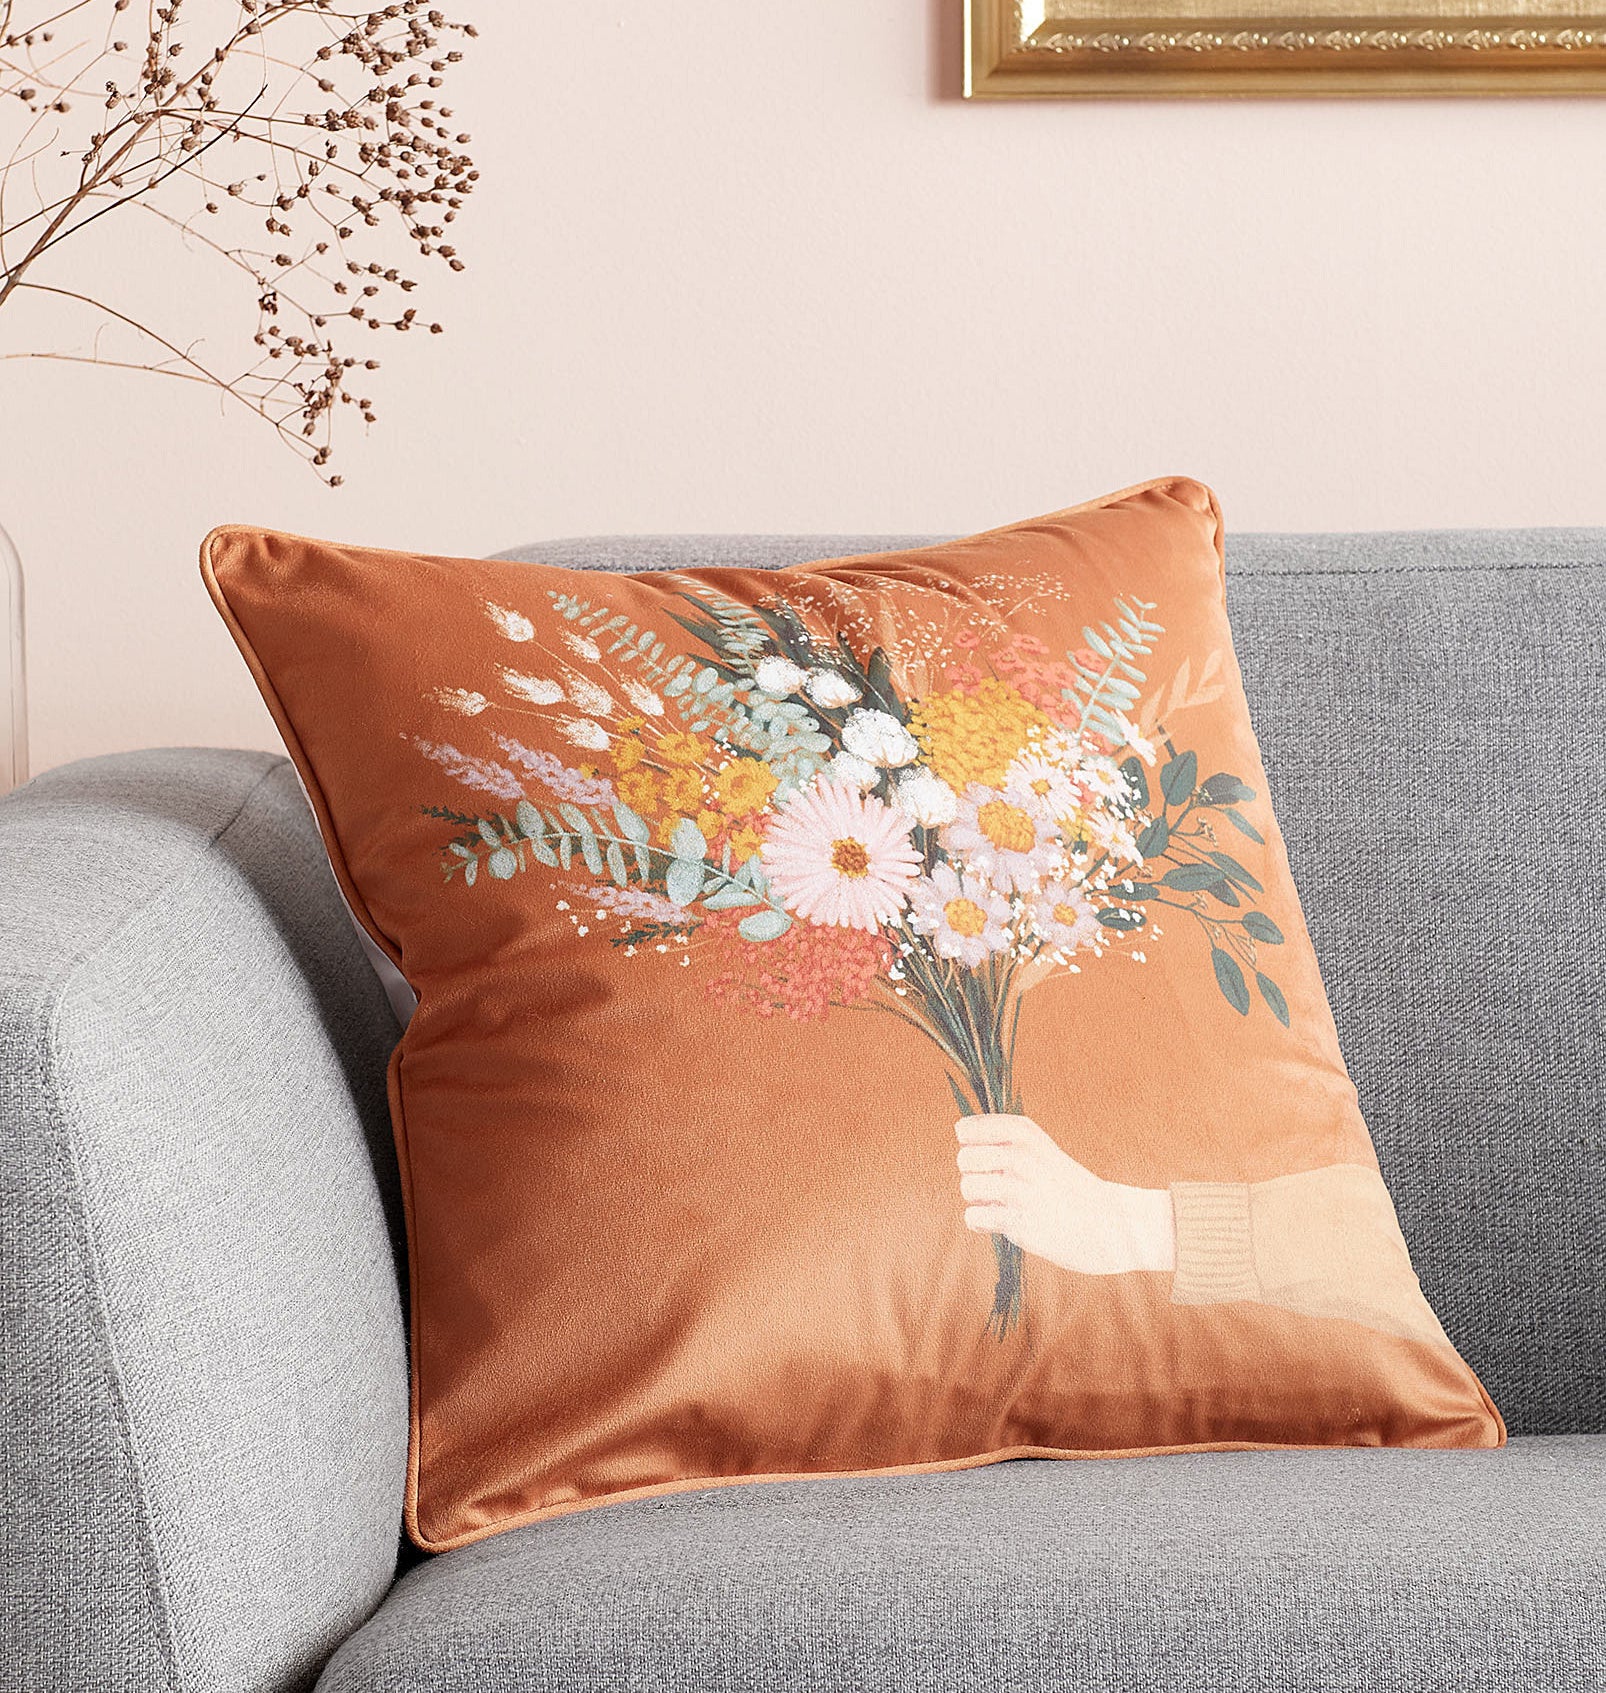 A floral throw pillow on a couch